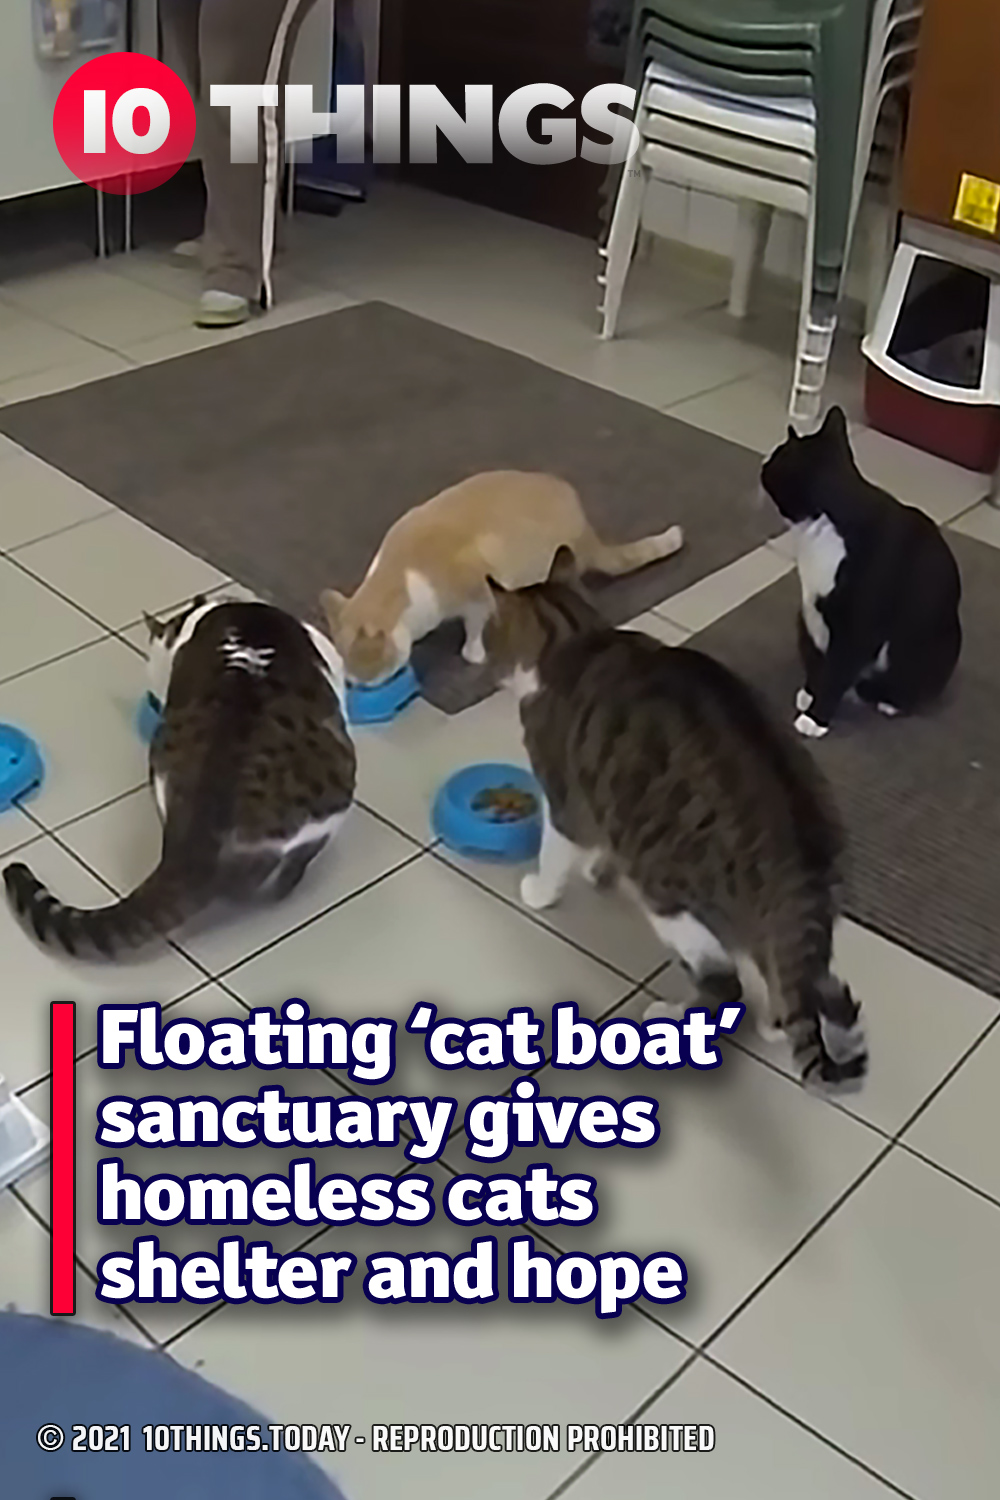 Floating ‘cat boat’ sanctuary gives homeless cats shelter and hope